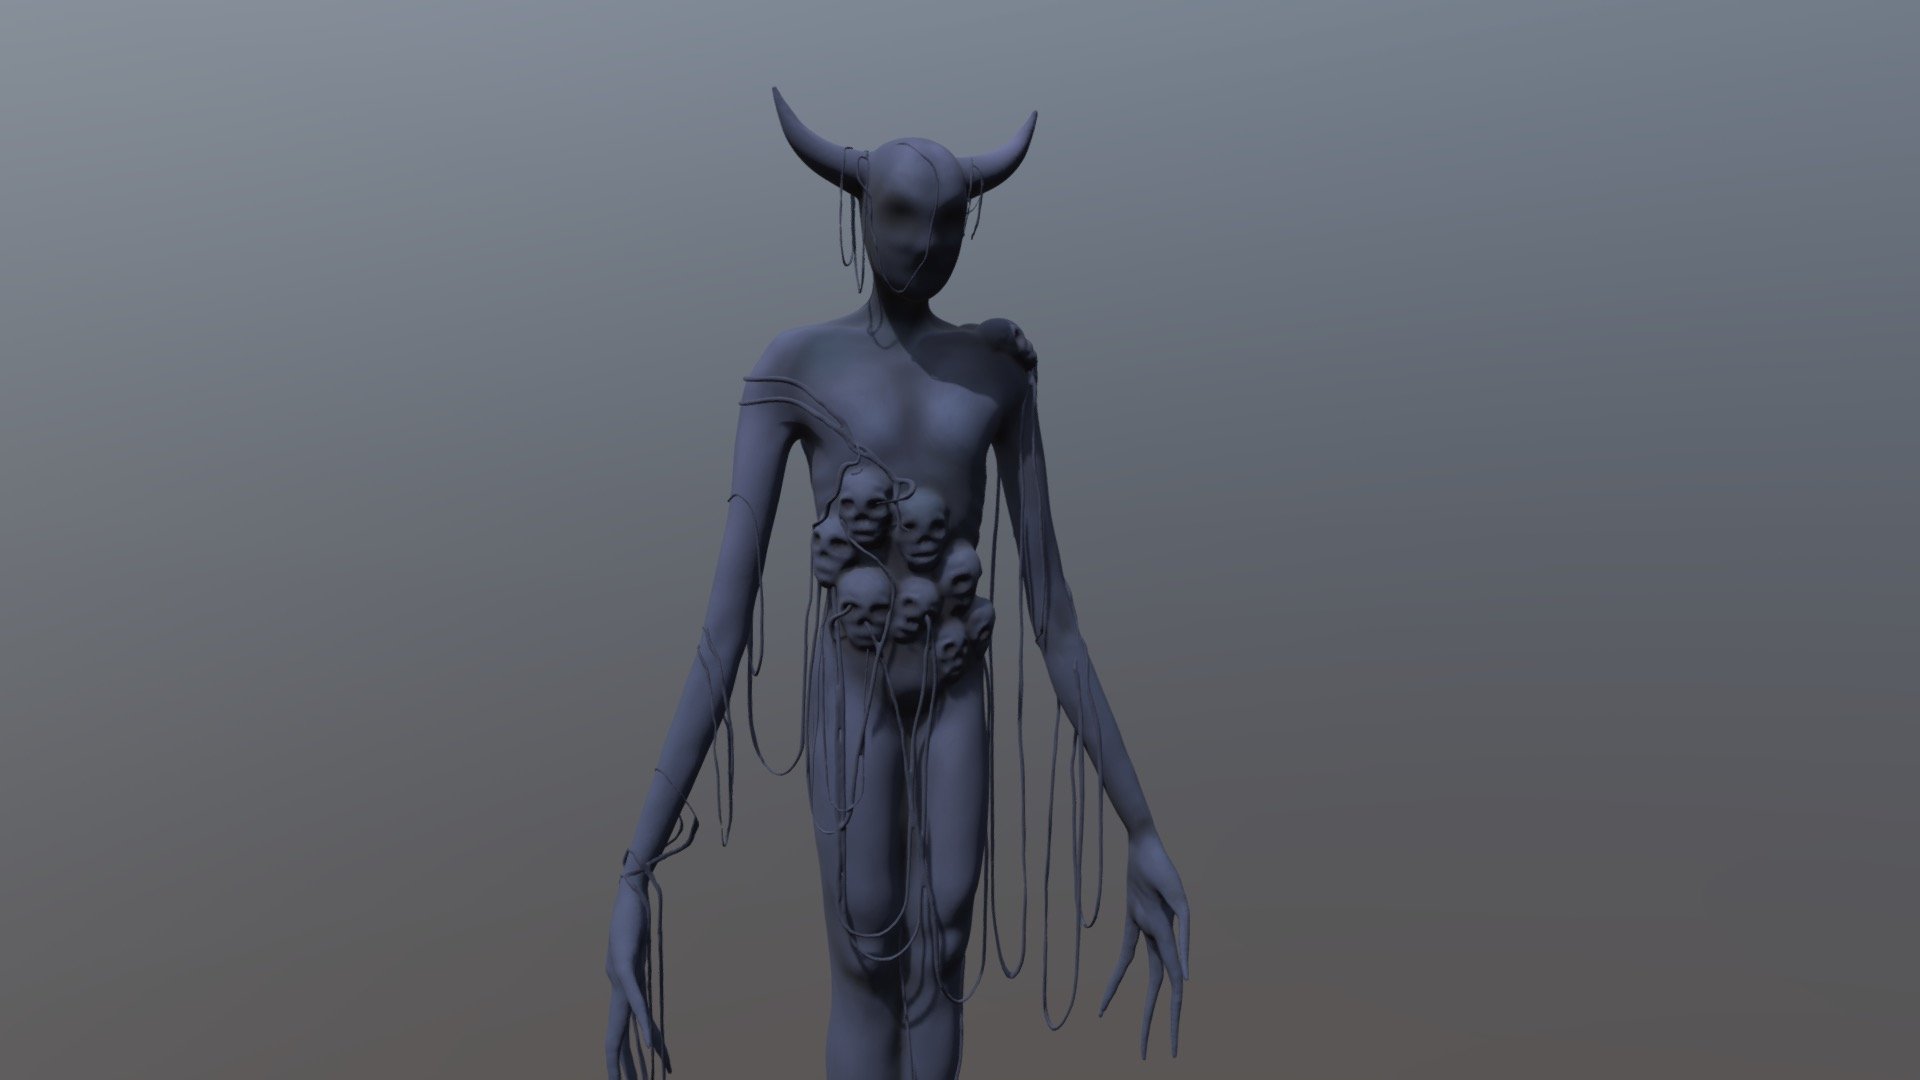 Forlorn, the Doomed - 3D model by eerie.cg [4a57141] - Sketchfab